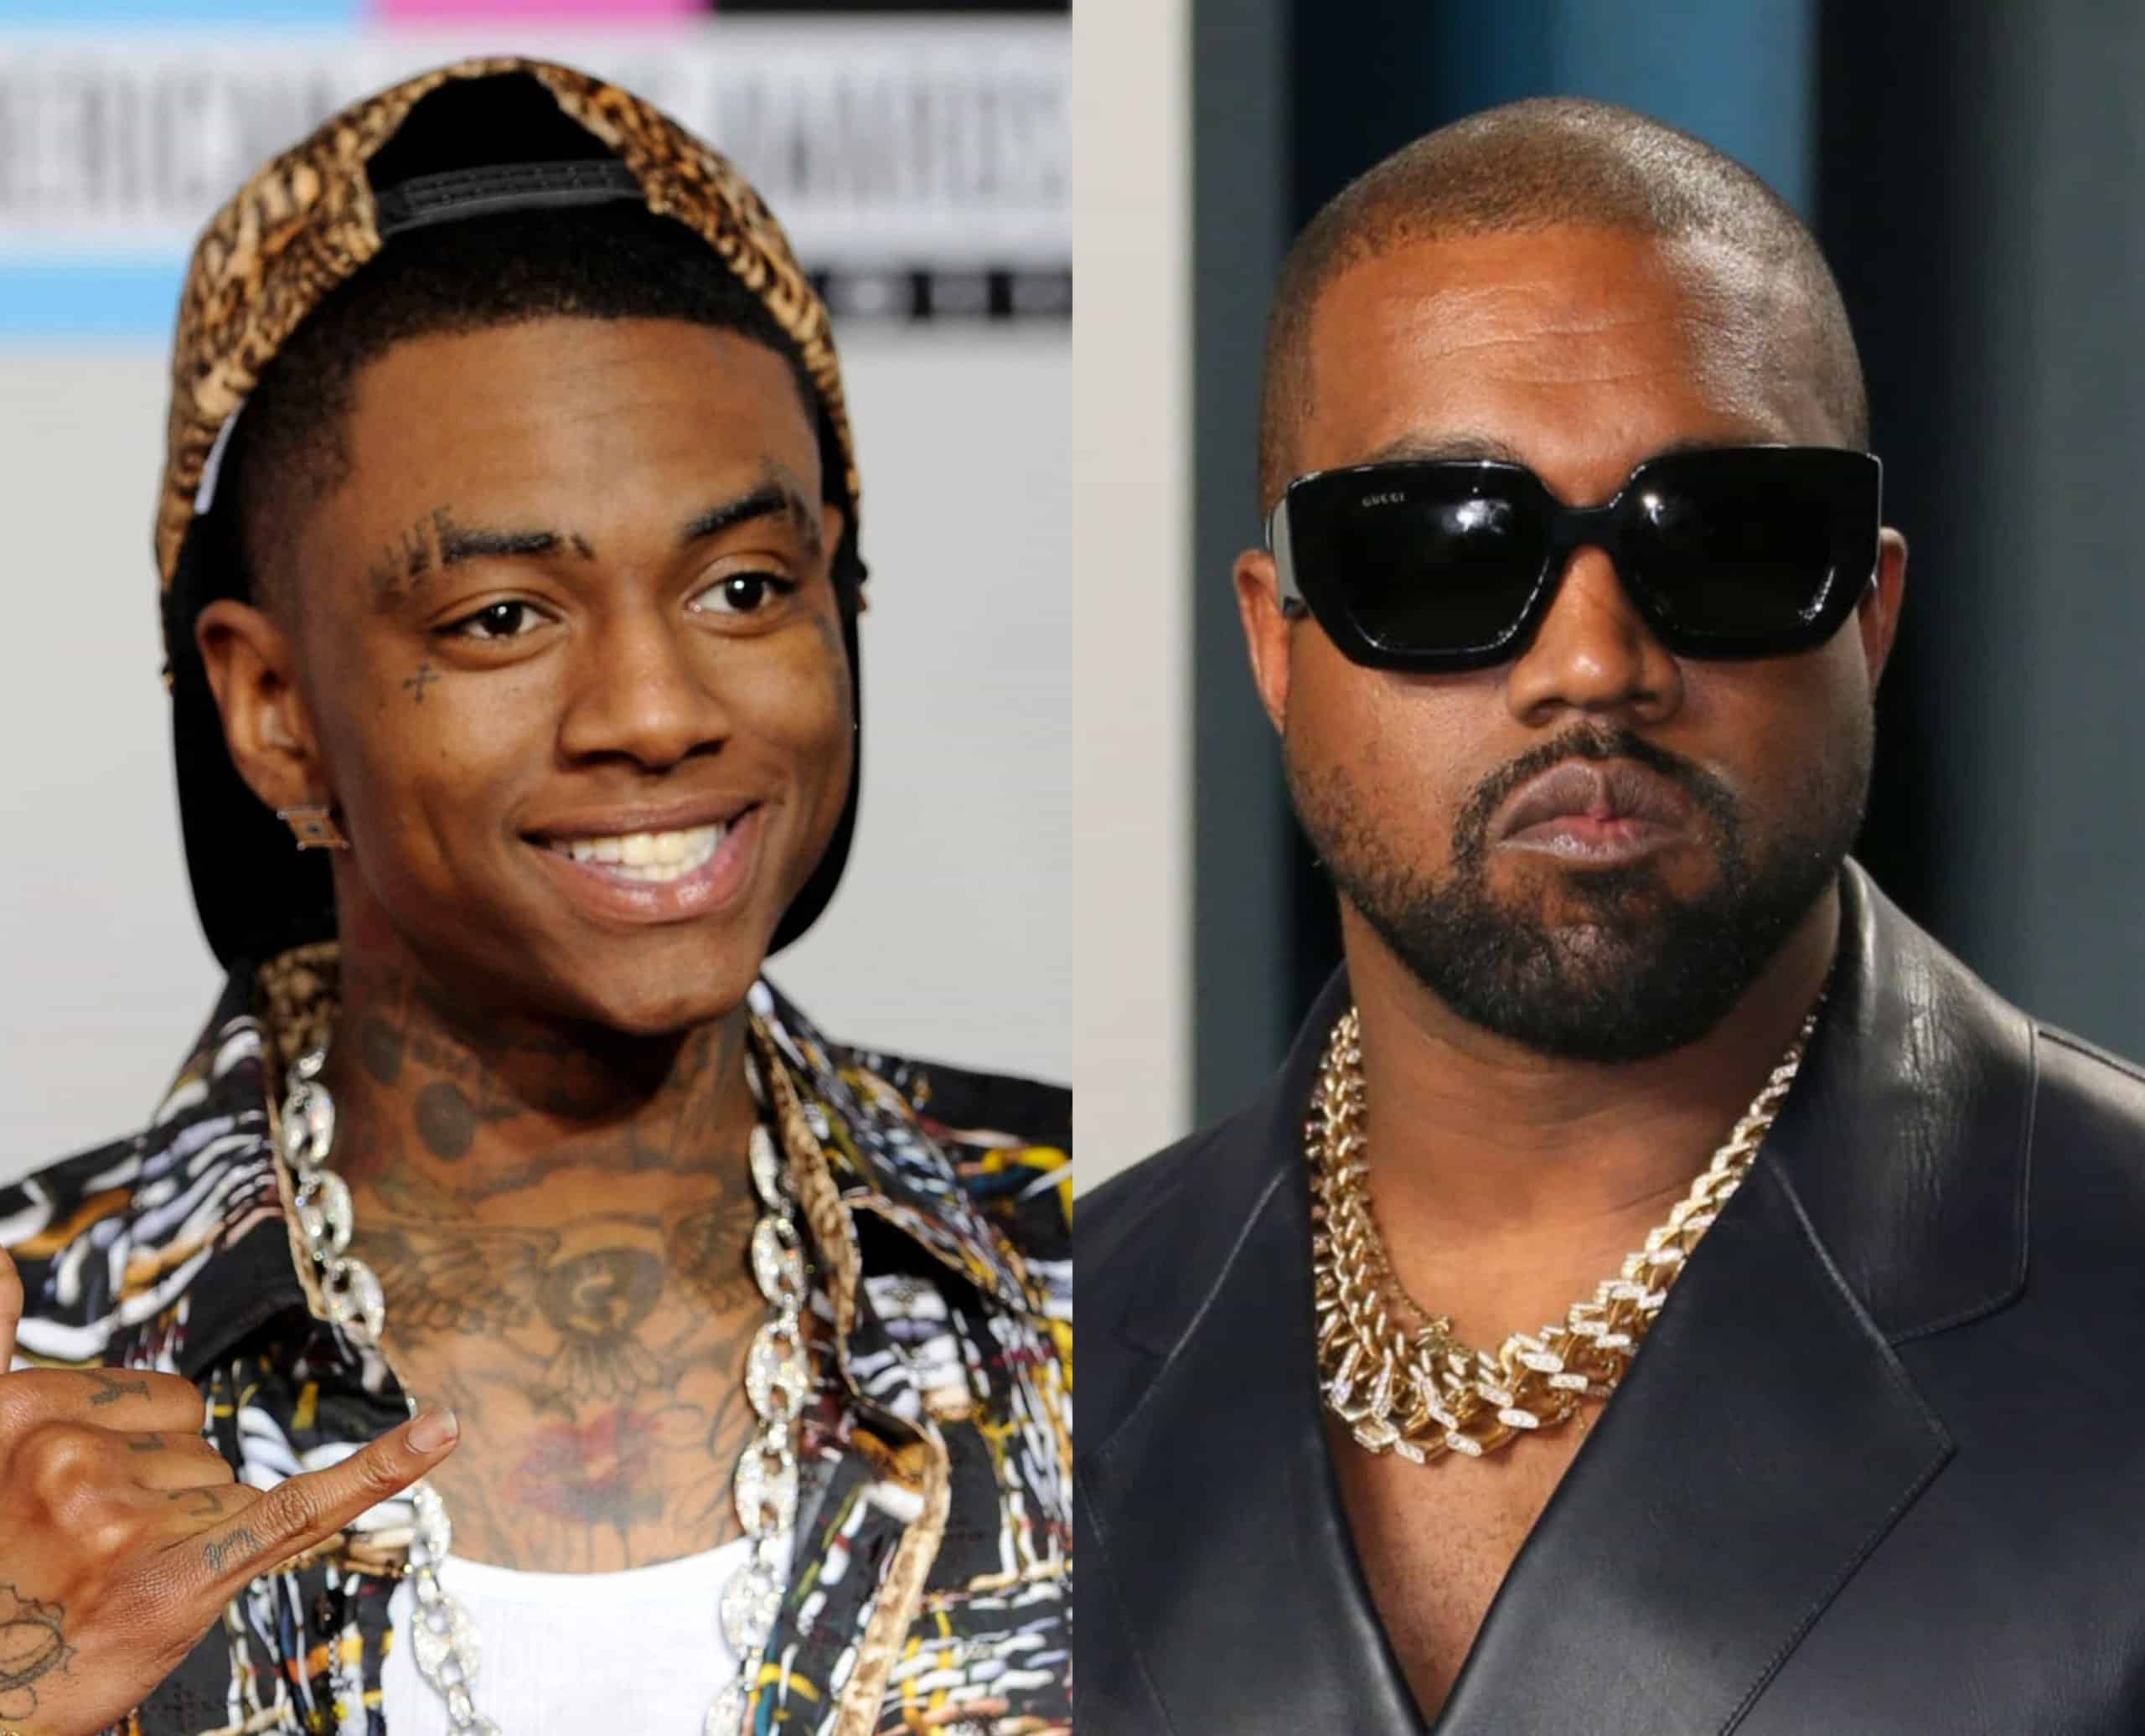 Soulja Boy Makes Fun of Kanye West's New Hairstyle